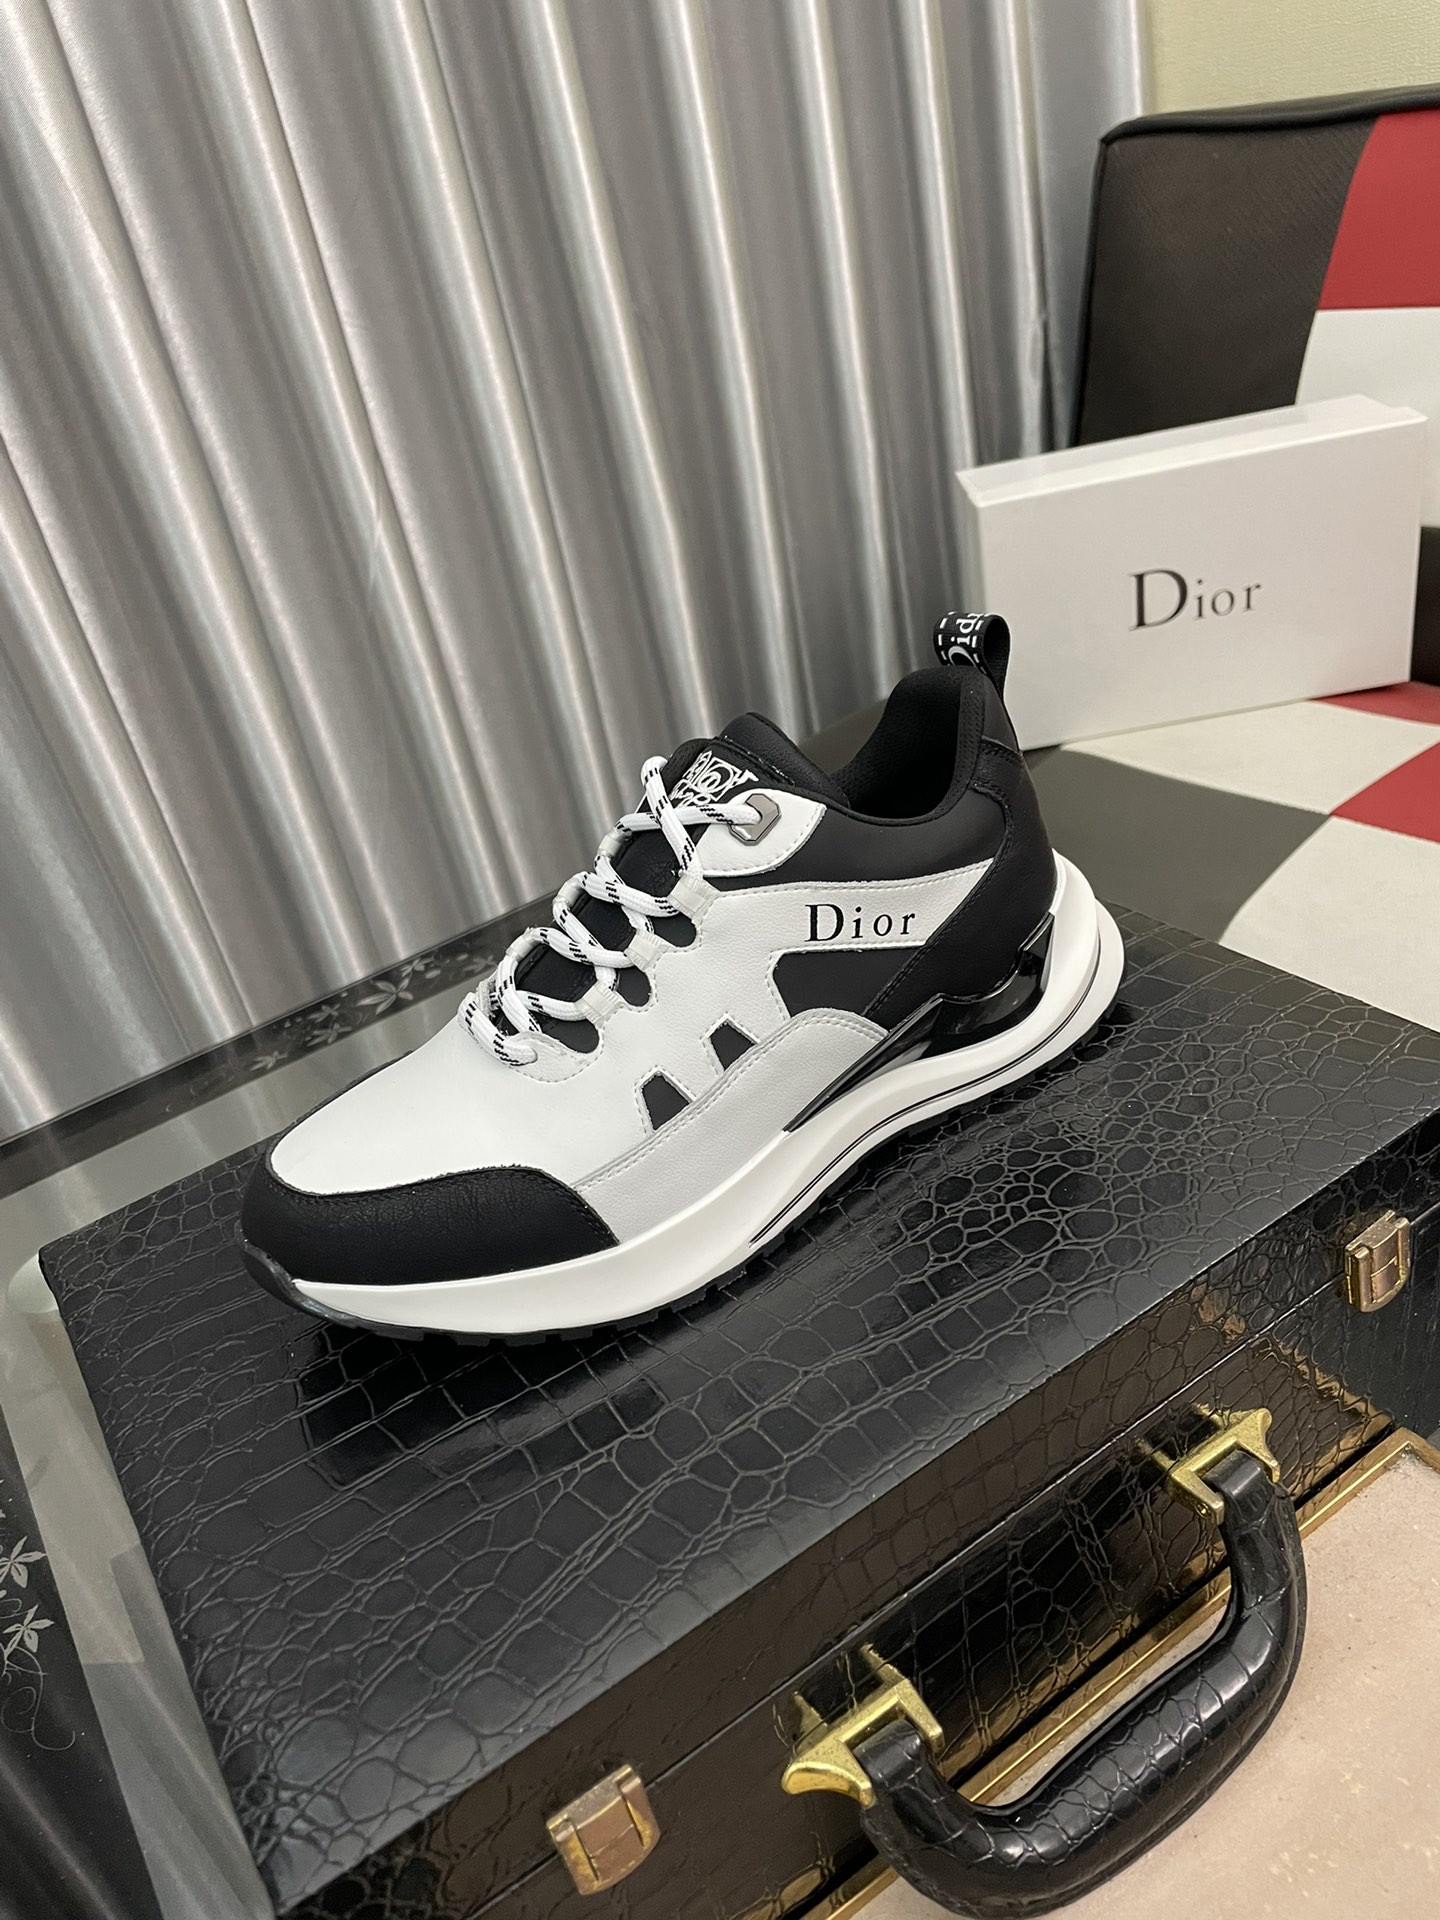 Dior Shoes Sneakers White Rubber Sweatpants